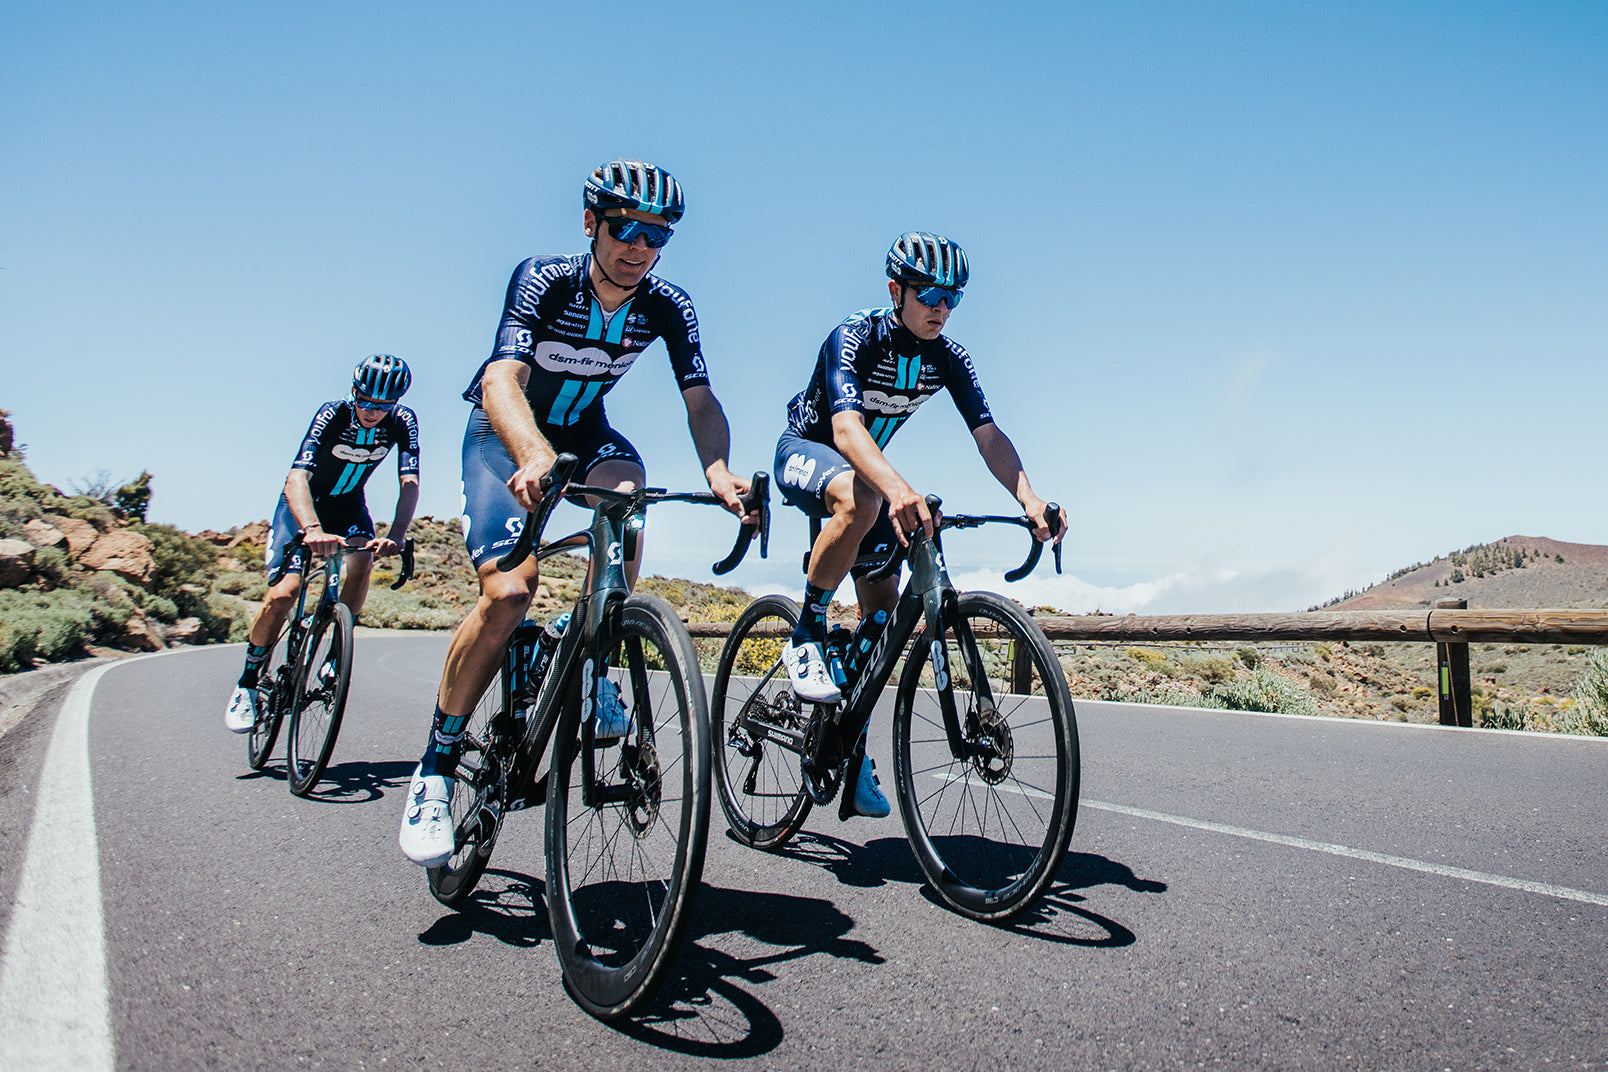 3 athletes from the french DSM team riding road racing style bicycles and wearing matching cycling outfits.